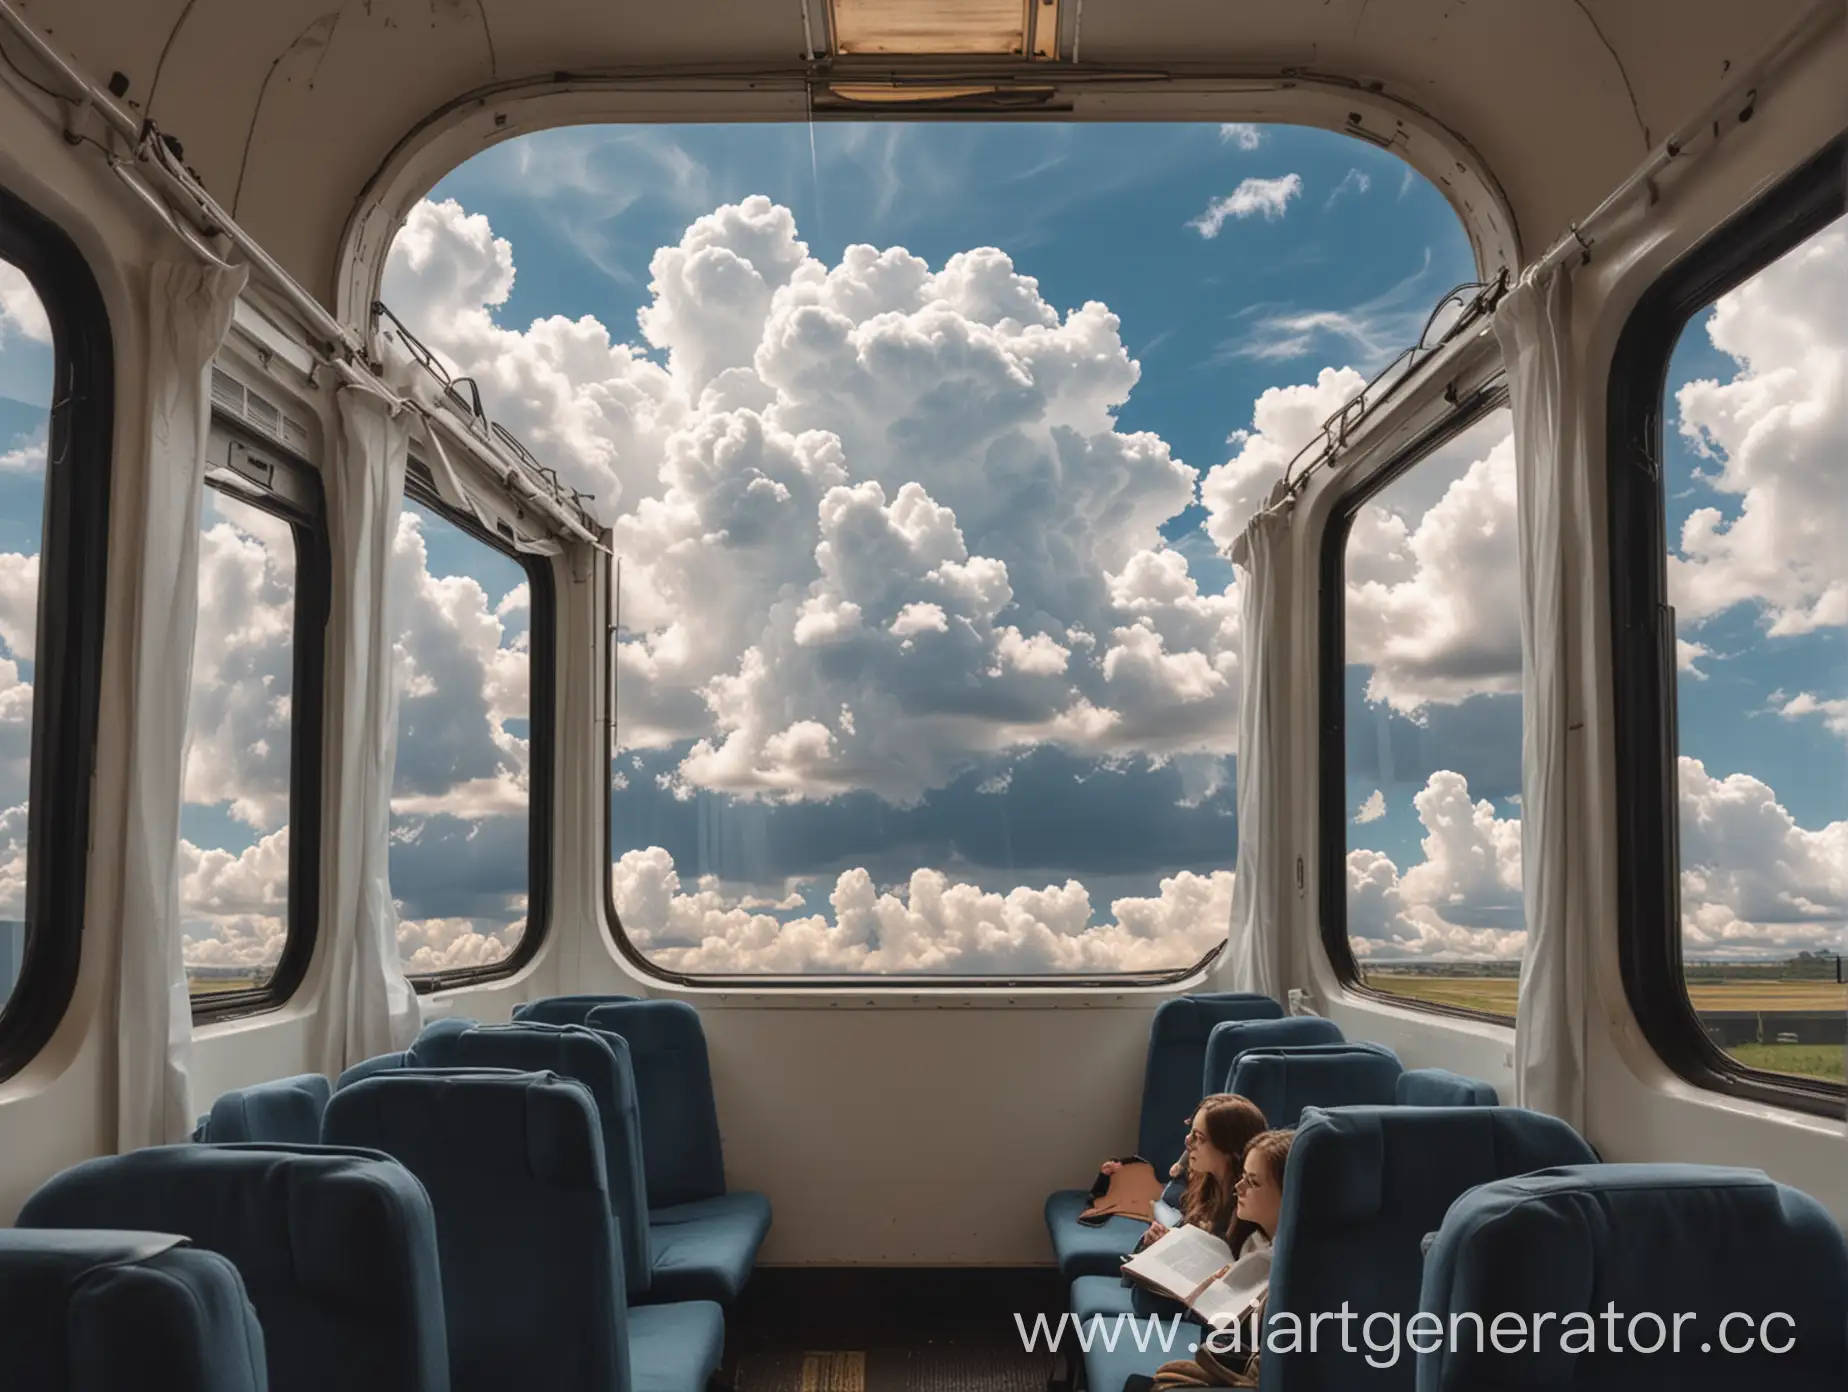 A train in which graduate students are sitting against the background of a window, joyful and with thoughts in the form of clouds above their heads (but the clouds are empty)